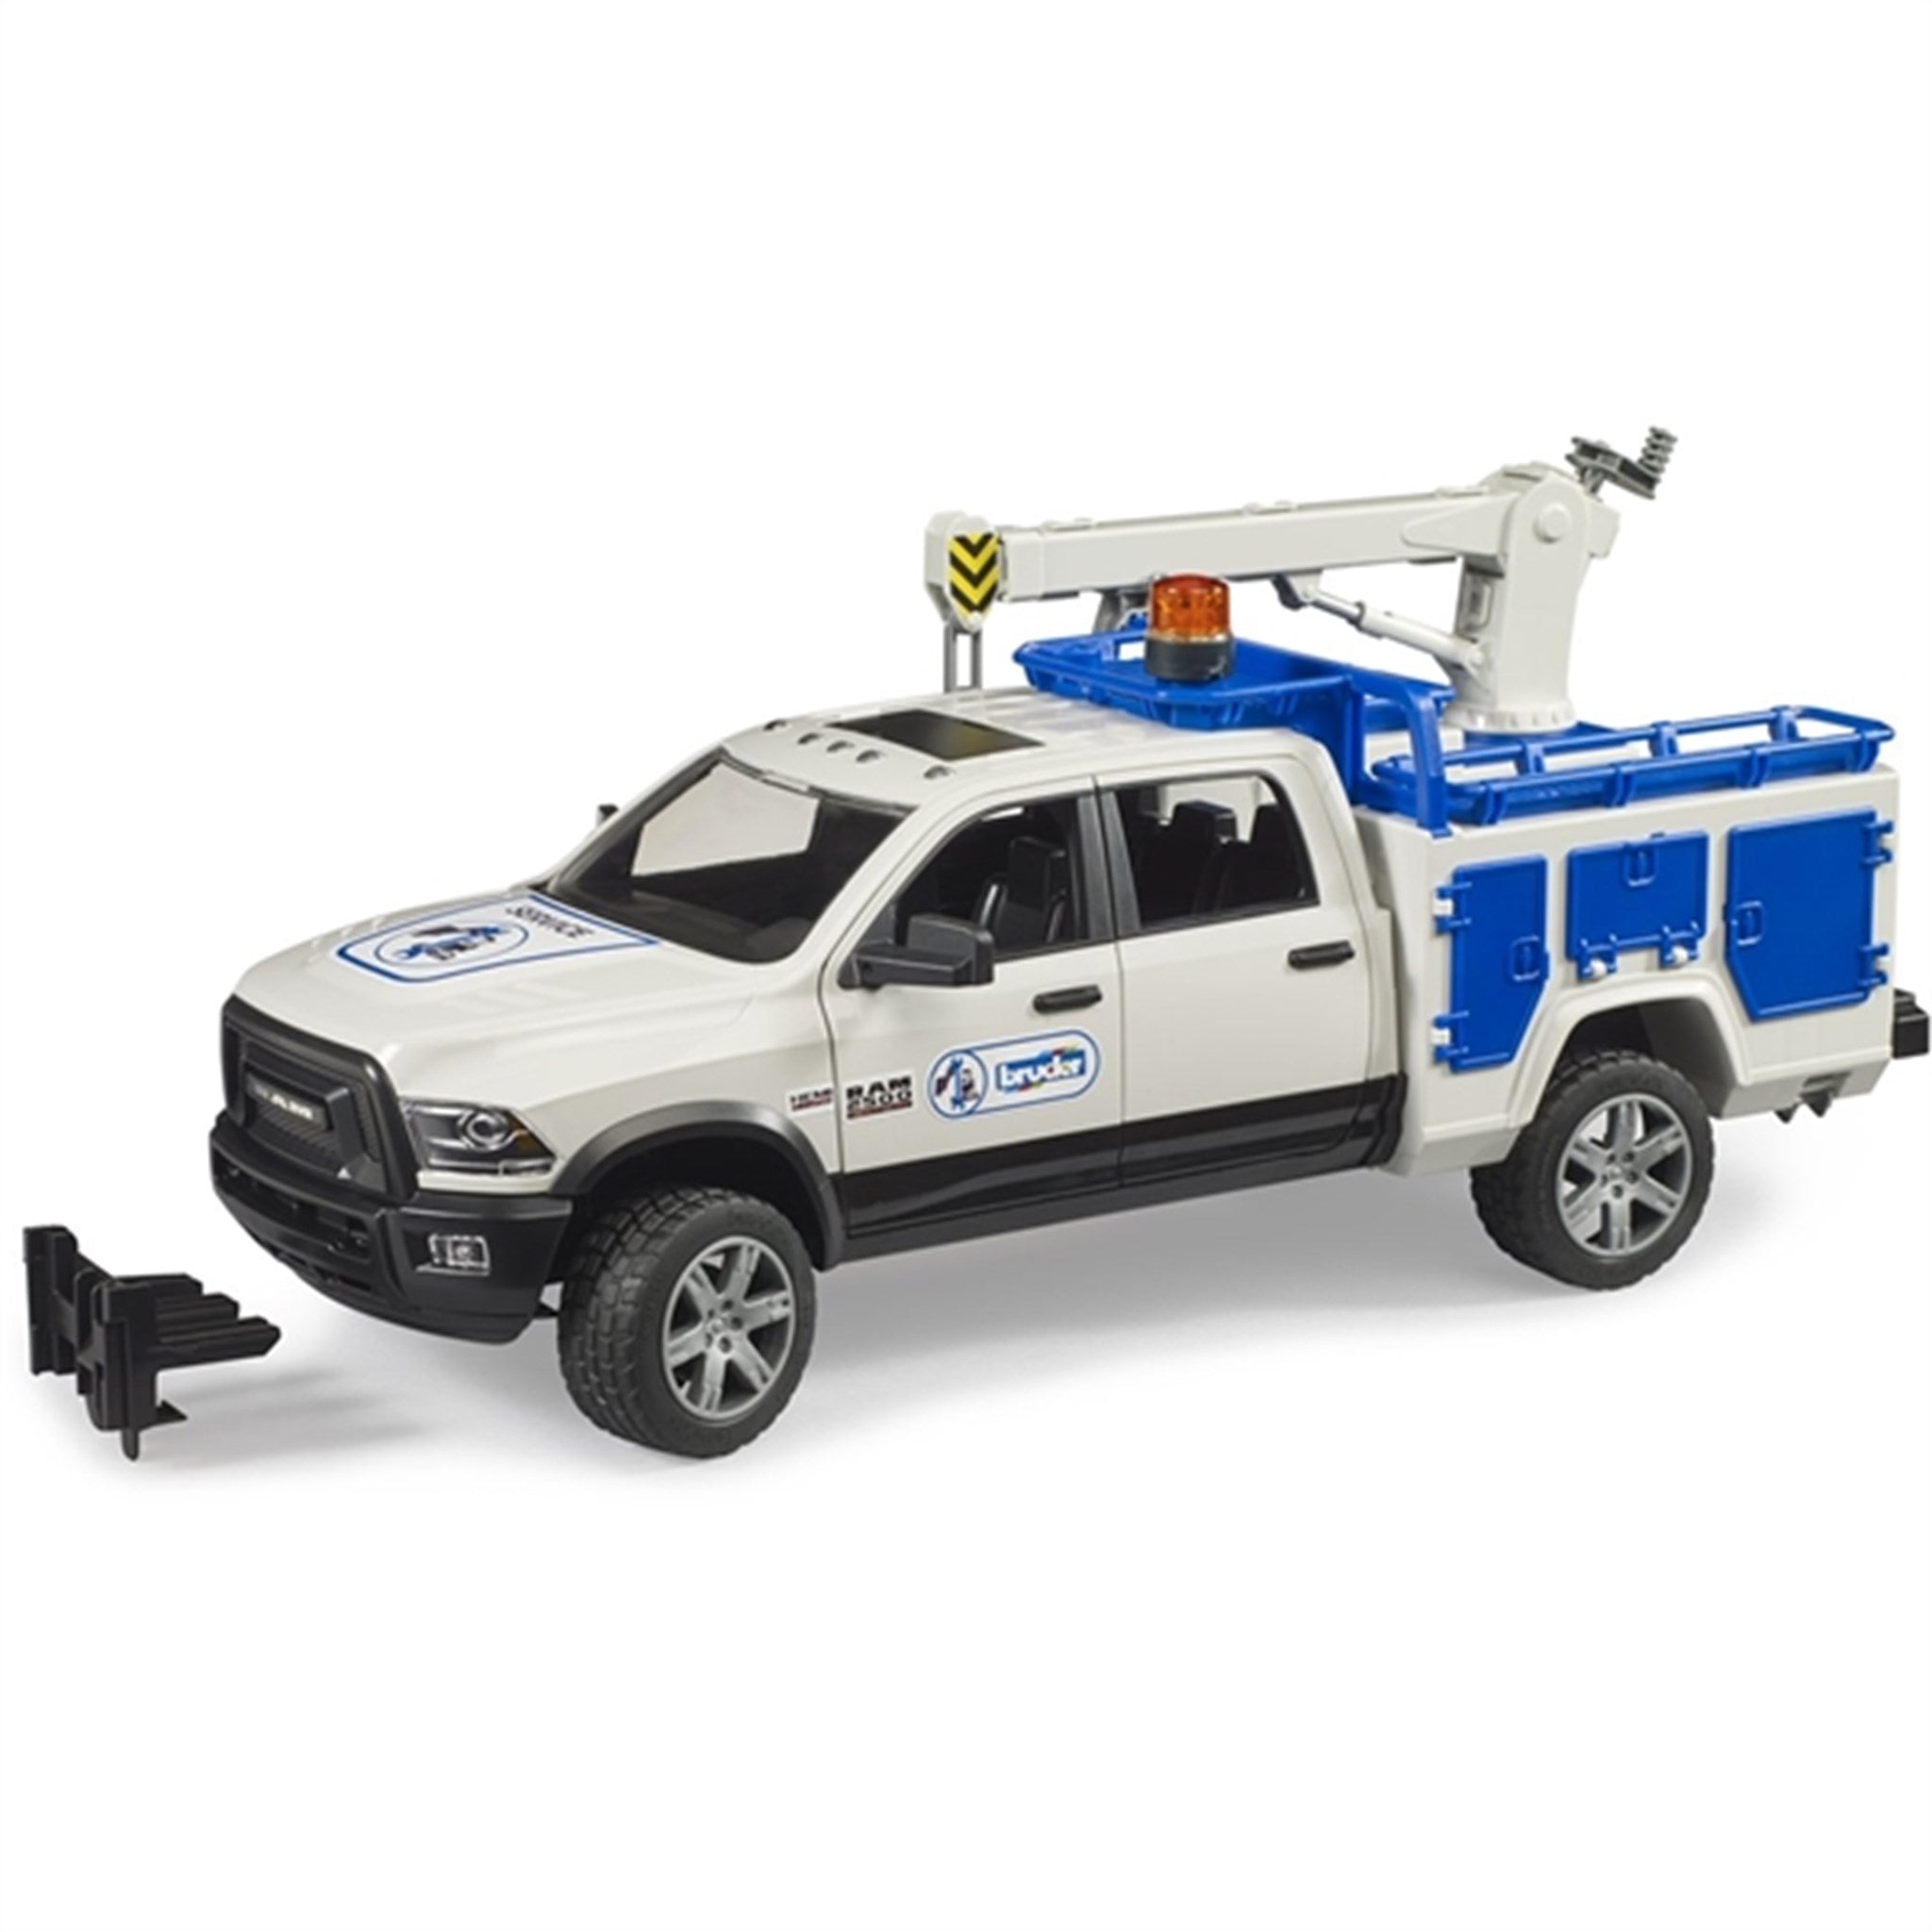 Bruder RAM 2500 Service Truck with Rotating Beacon Light 5